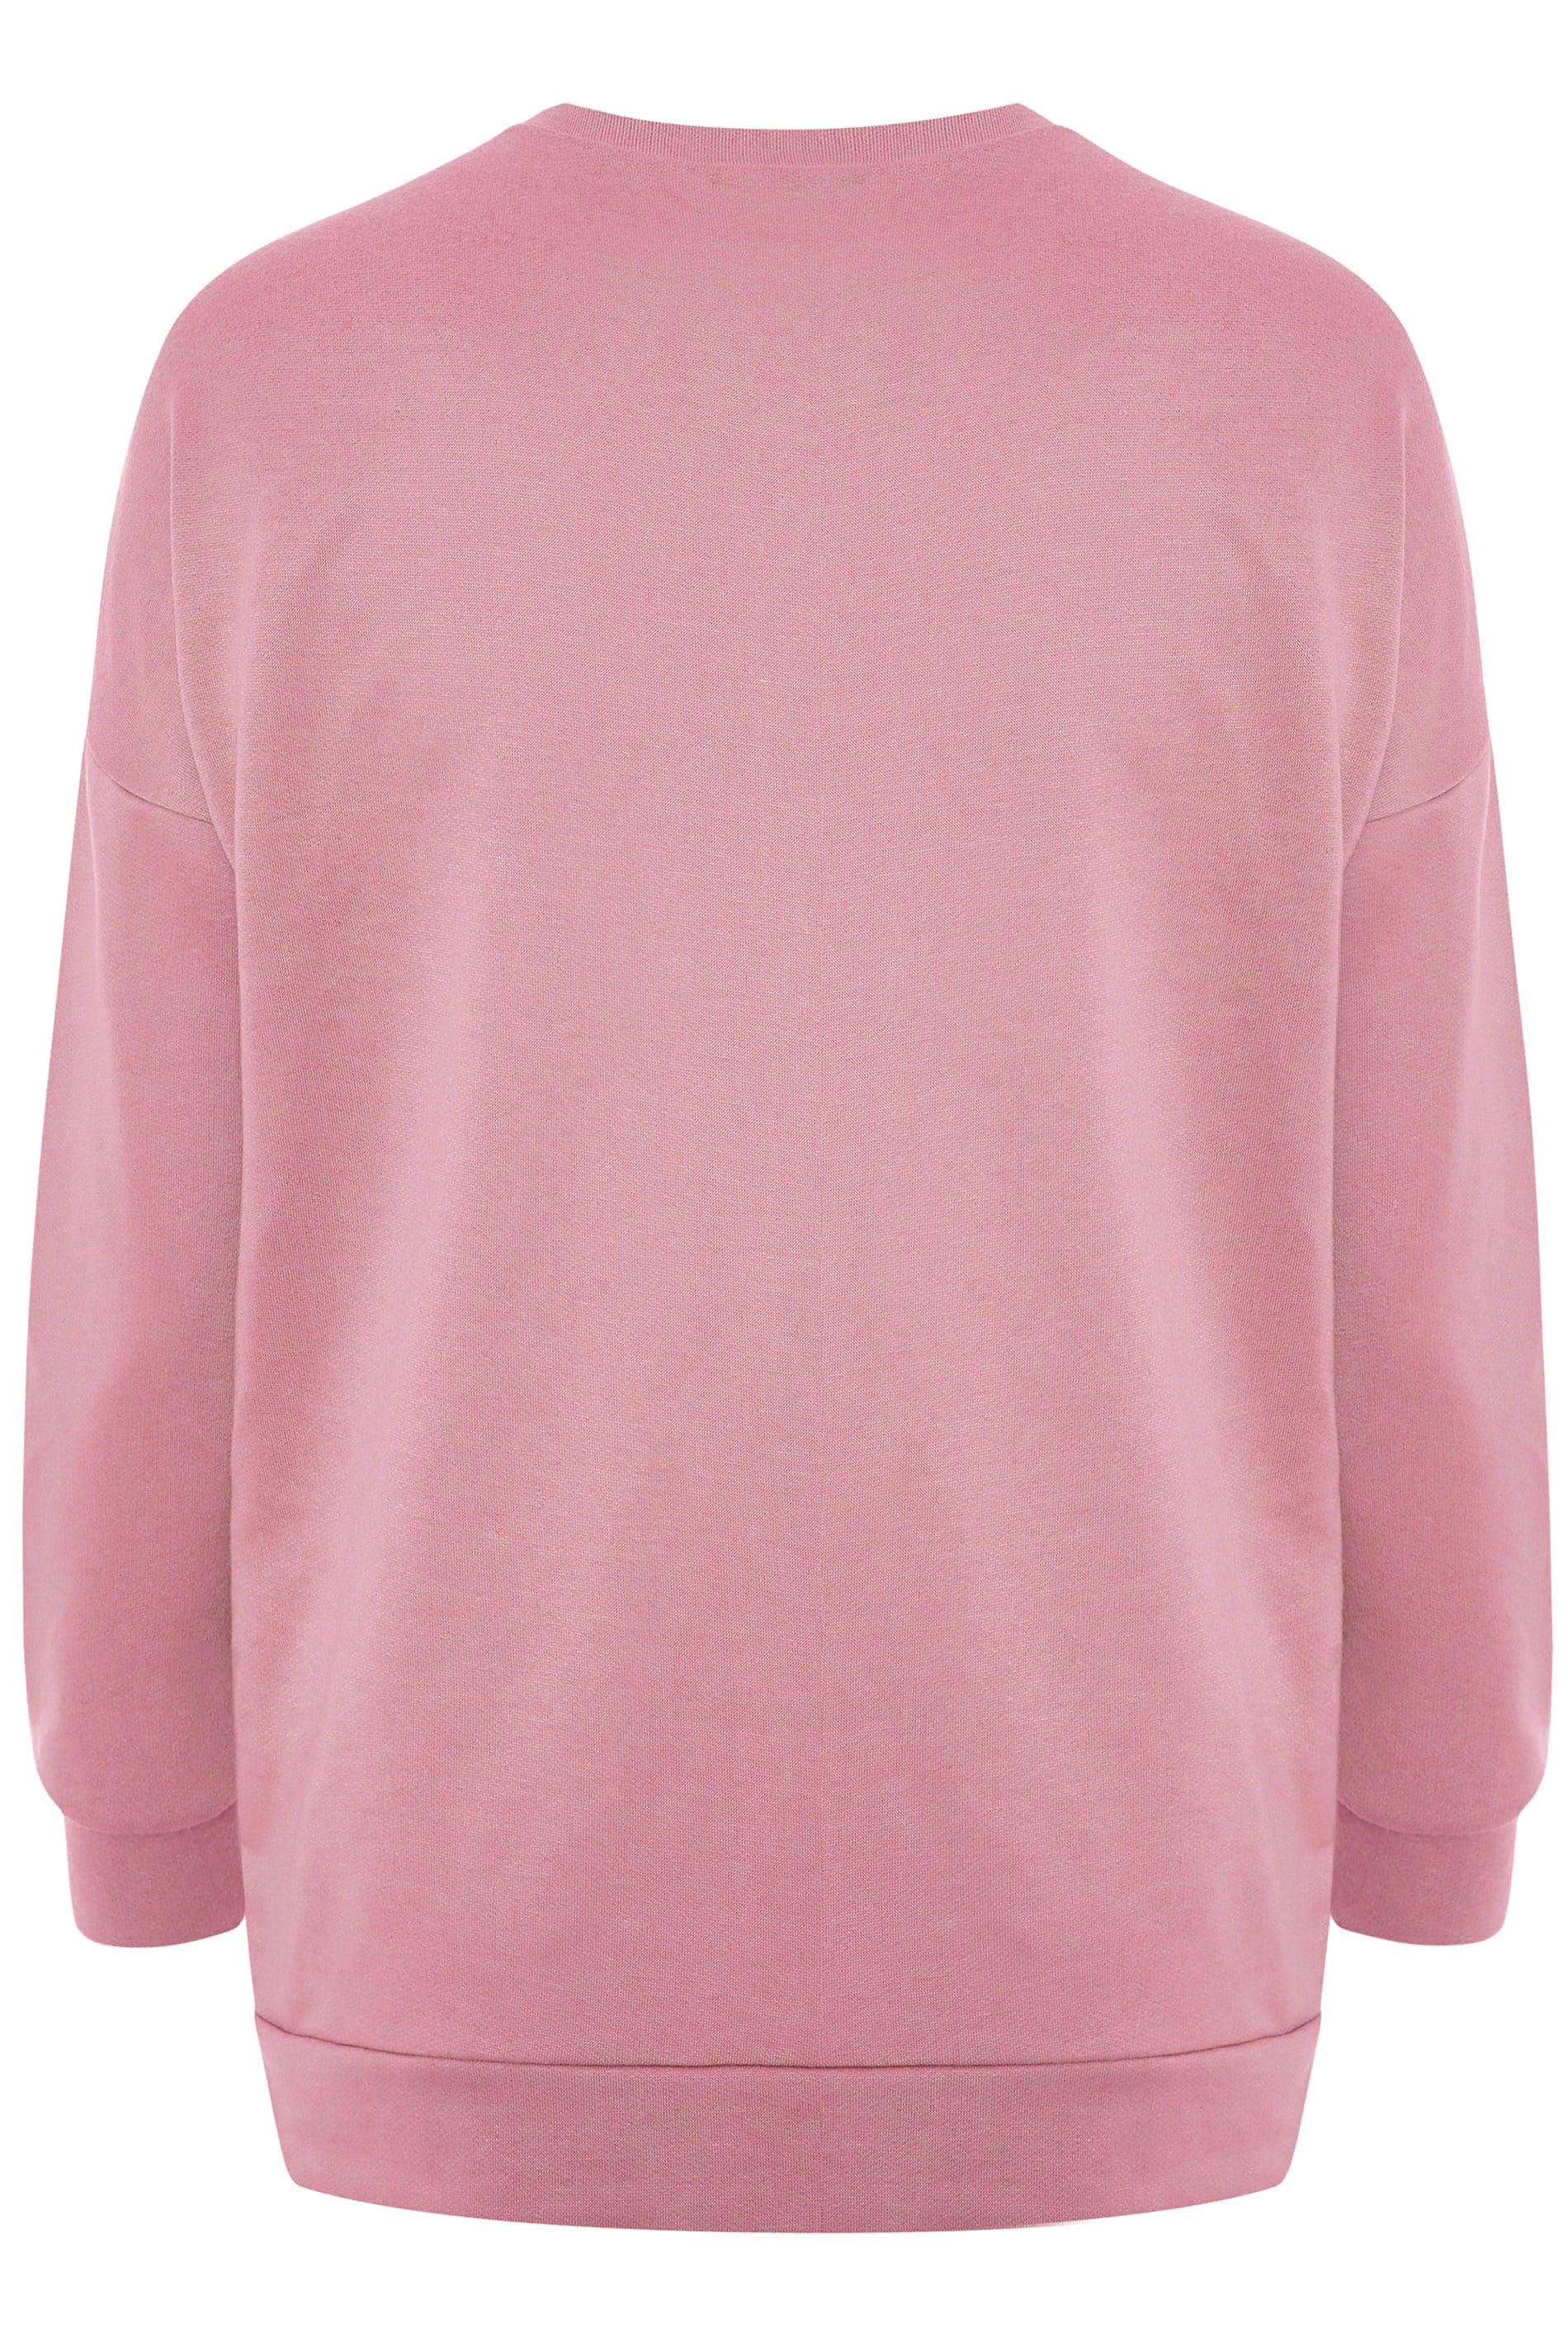 LIMITED COLLECTION Blush Pink Sweatshirt | Yours Clothing